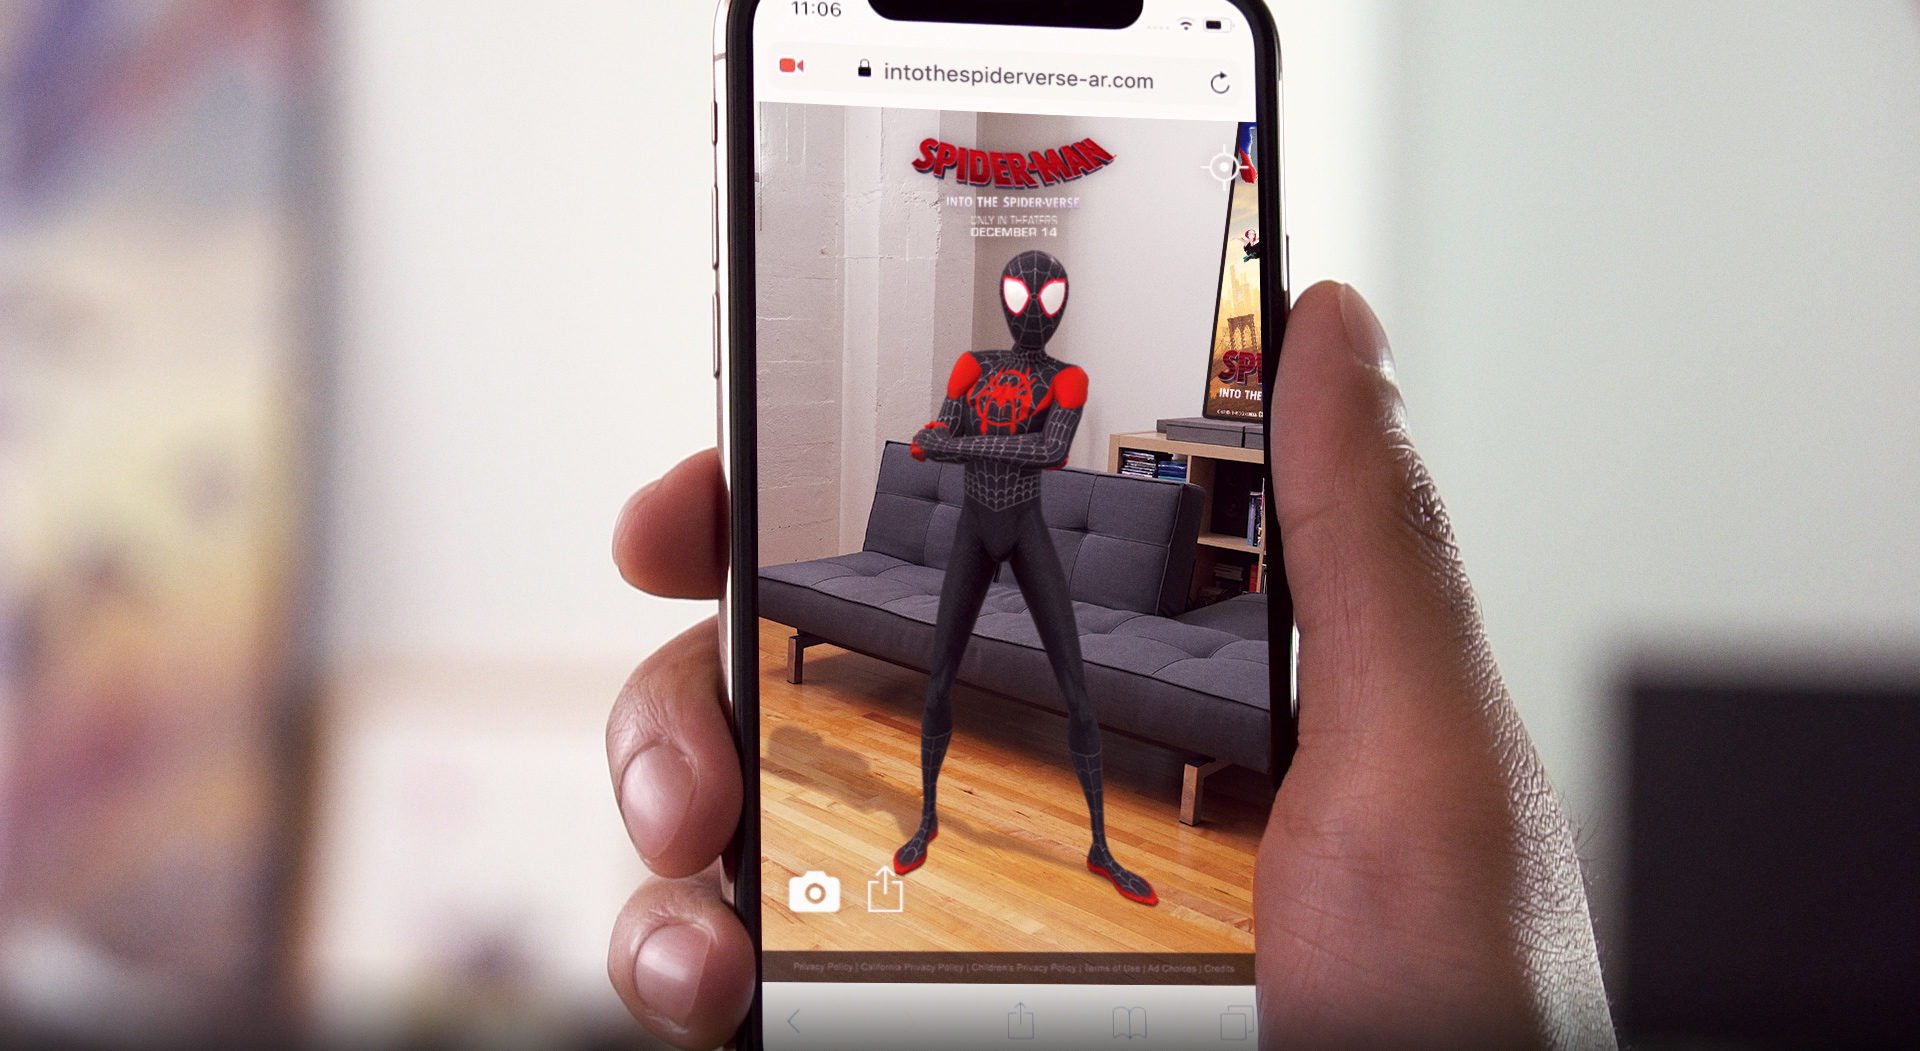 Phone Screen Showing the Spiderman: Into the Spiderverse Marketing